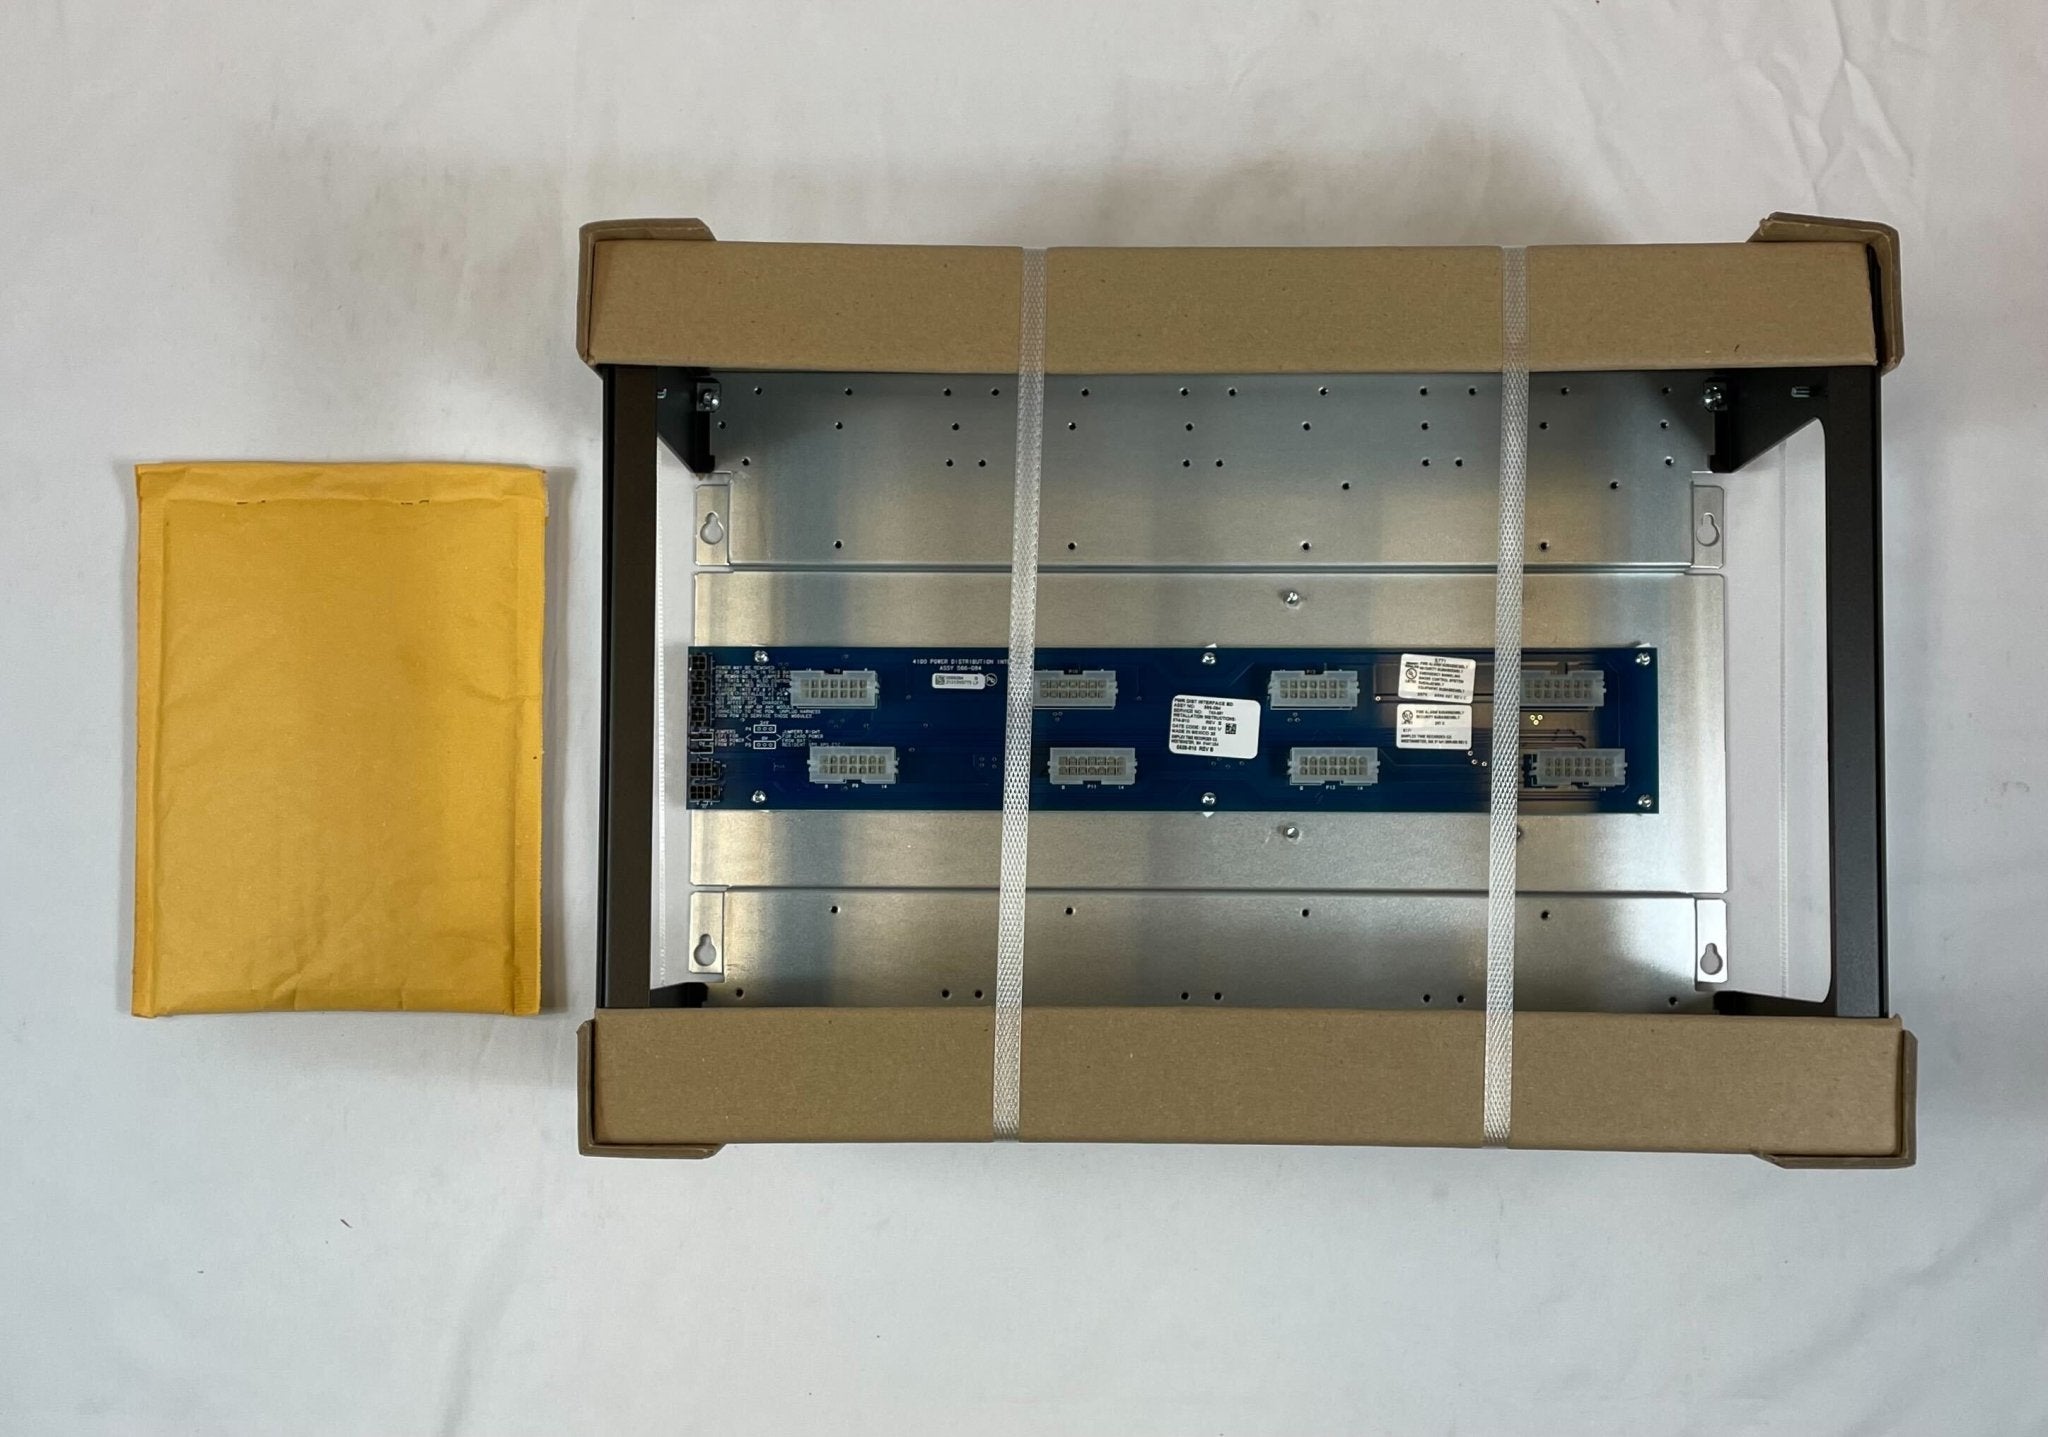 Simplex 4100-2300 Expansion Bay - The Fire Alarm Supplier